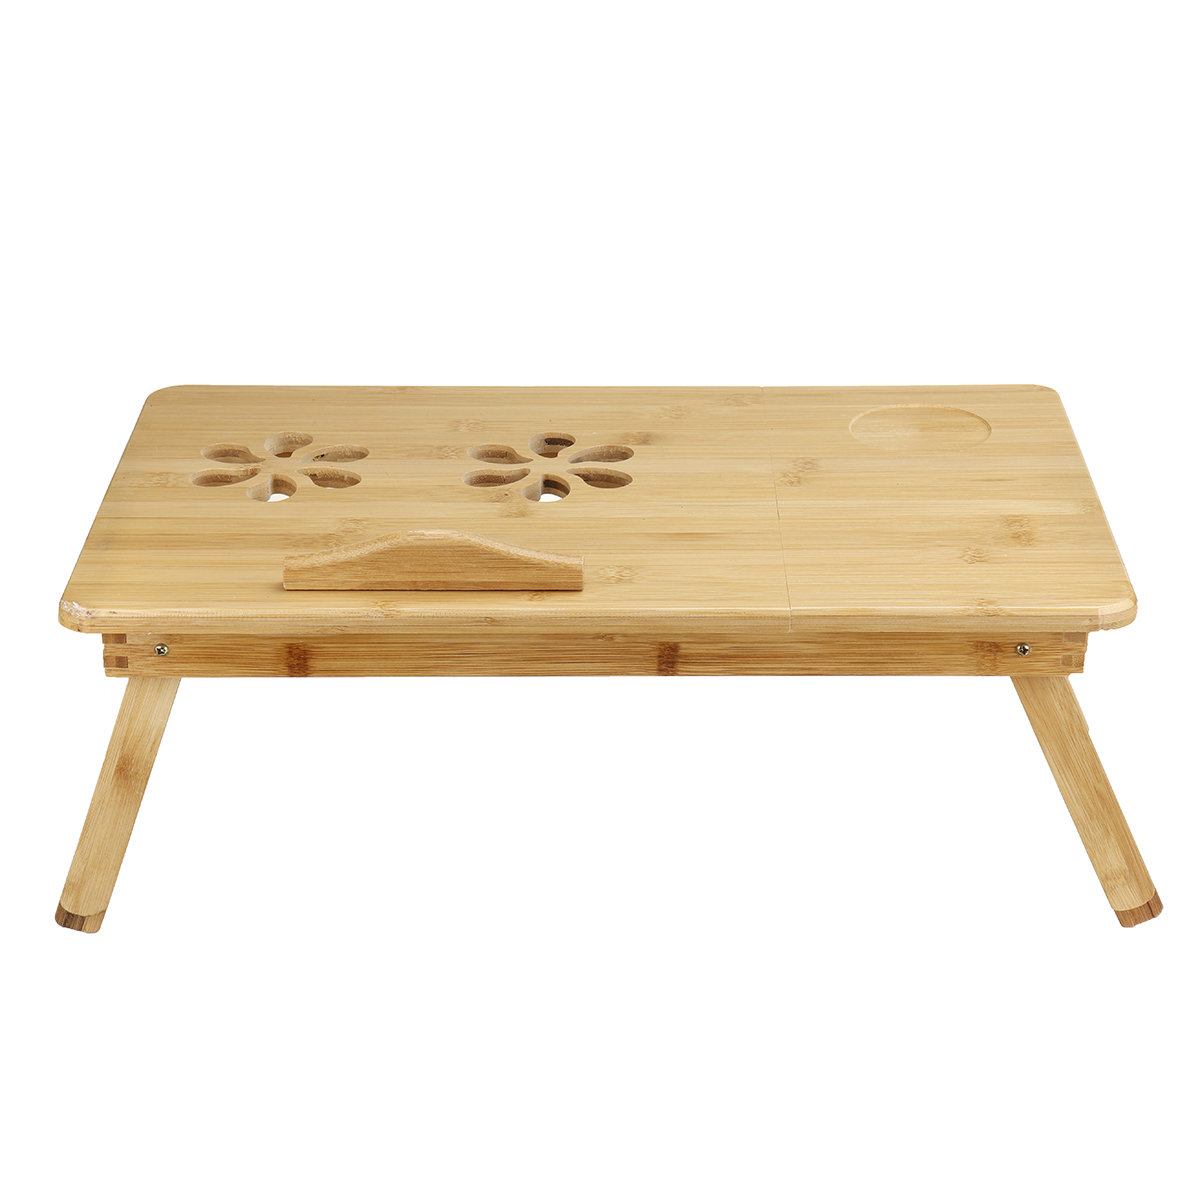 Portable-Deluxe-Bamboo-Laptop-Bed-Desk-Table-Foldable-Workstation-Tray-Lap-1754566-13